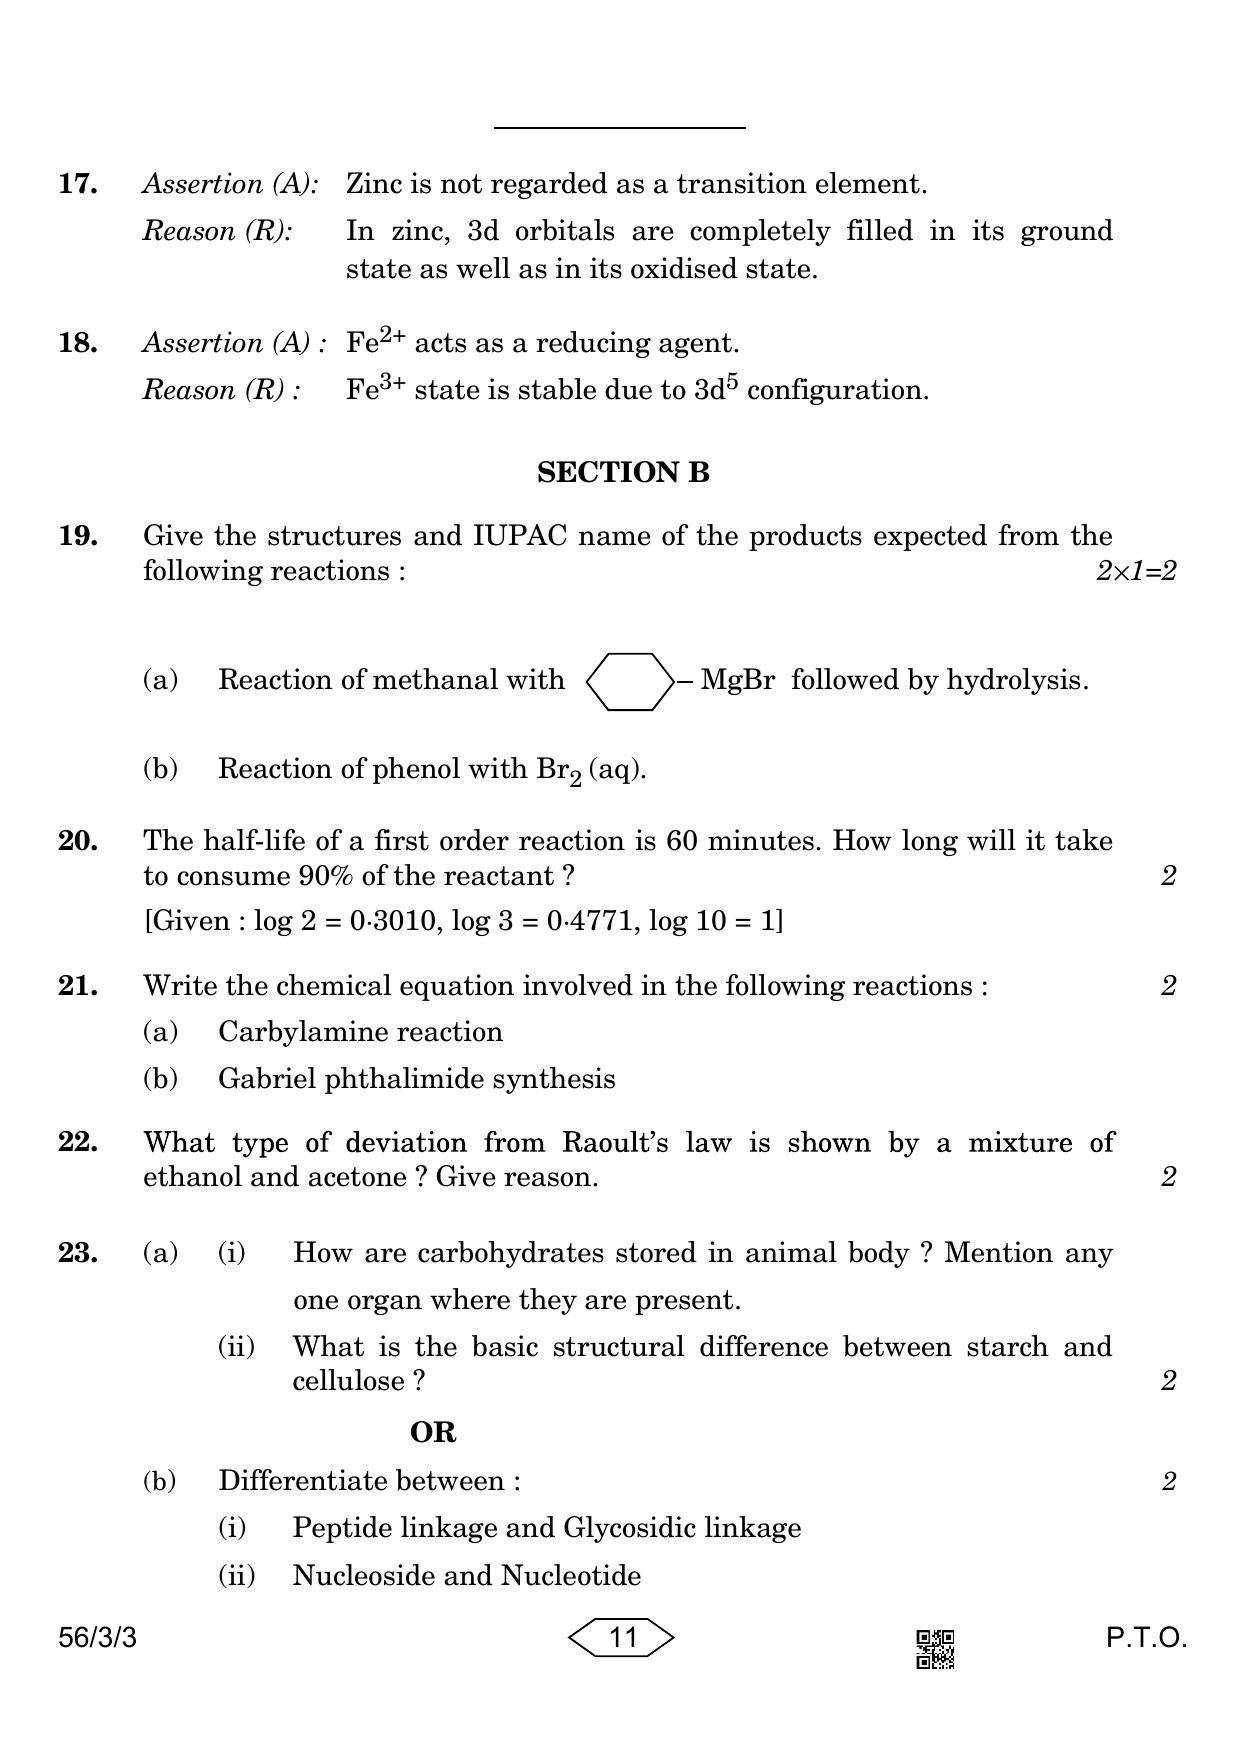 CBSE Class 12 56-3-3 Chemistry 2023 Question Paper - Page 11